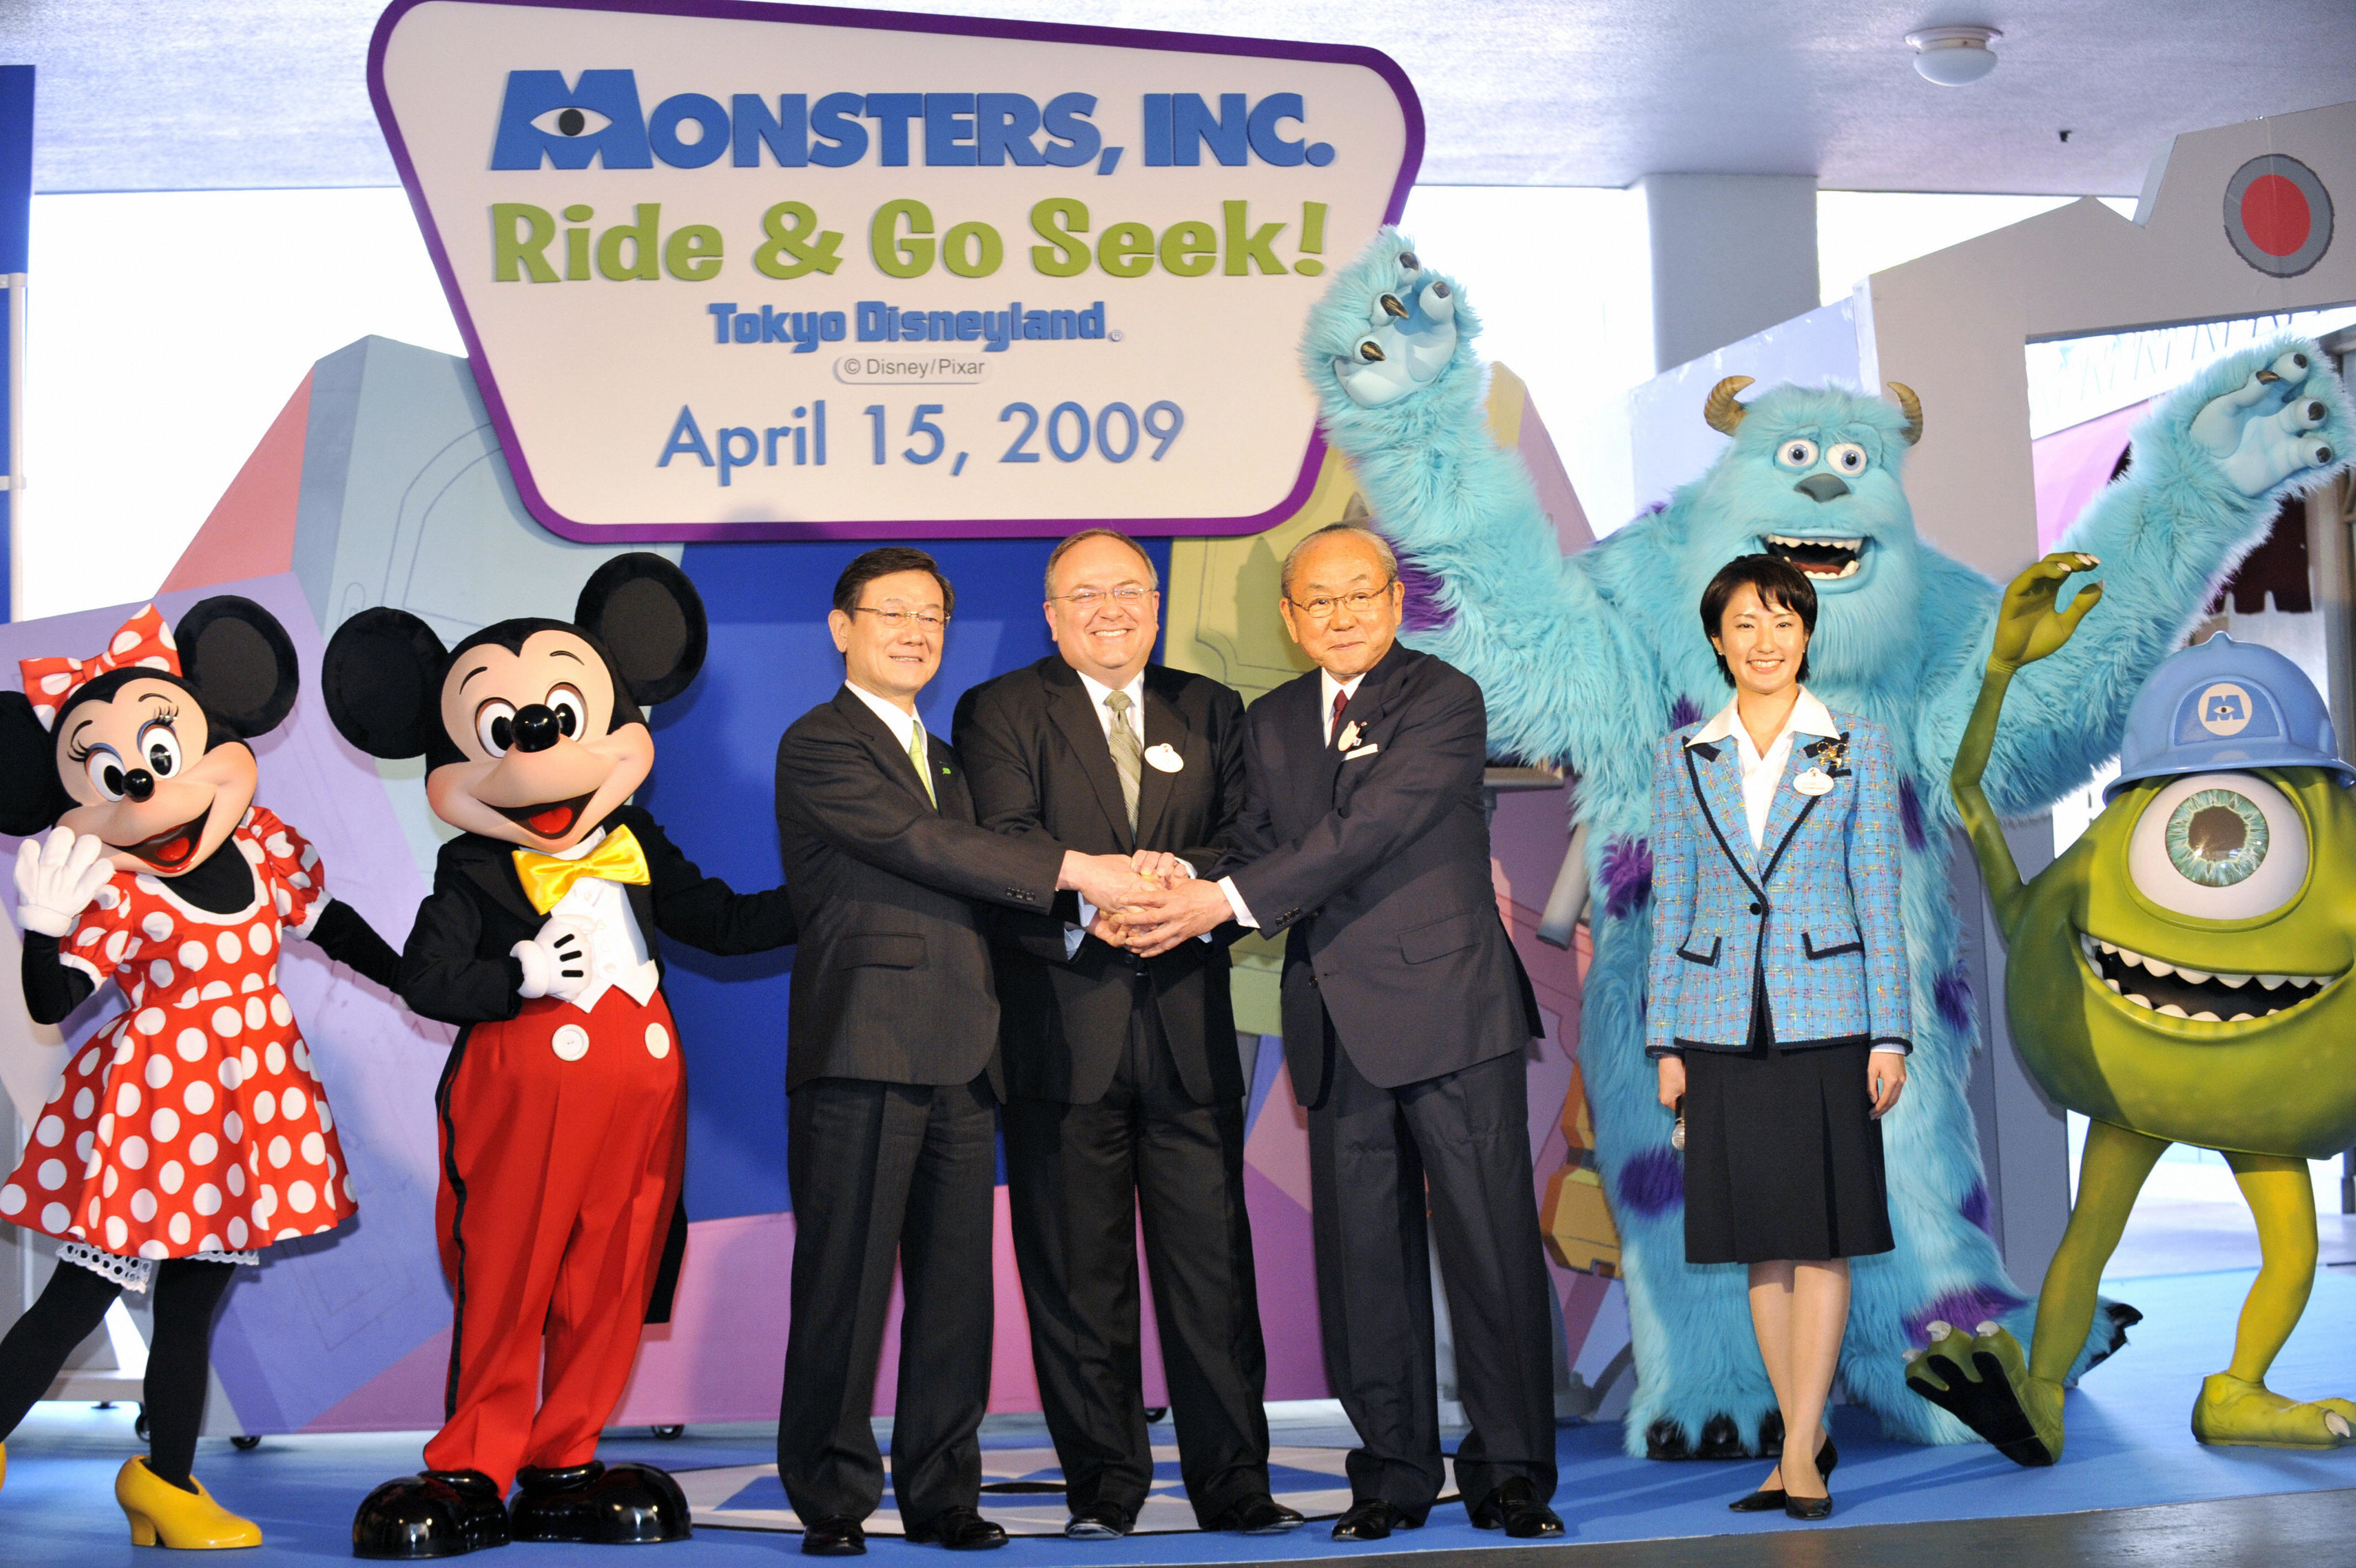 Minnie Mouse, Mickey Mouse, and Monsters, Inc. characters celebrate the launch of &quot;Monsters, Inc. Ride &amp;amp; Go Seek!&quot; at Tokyo Disneyland on April 15, 2009, with park officials